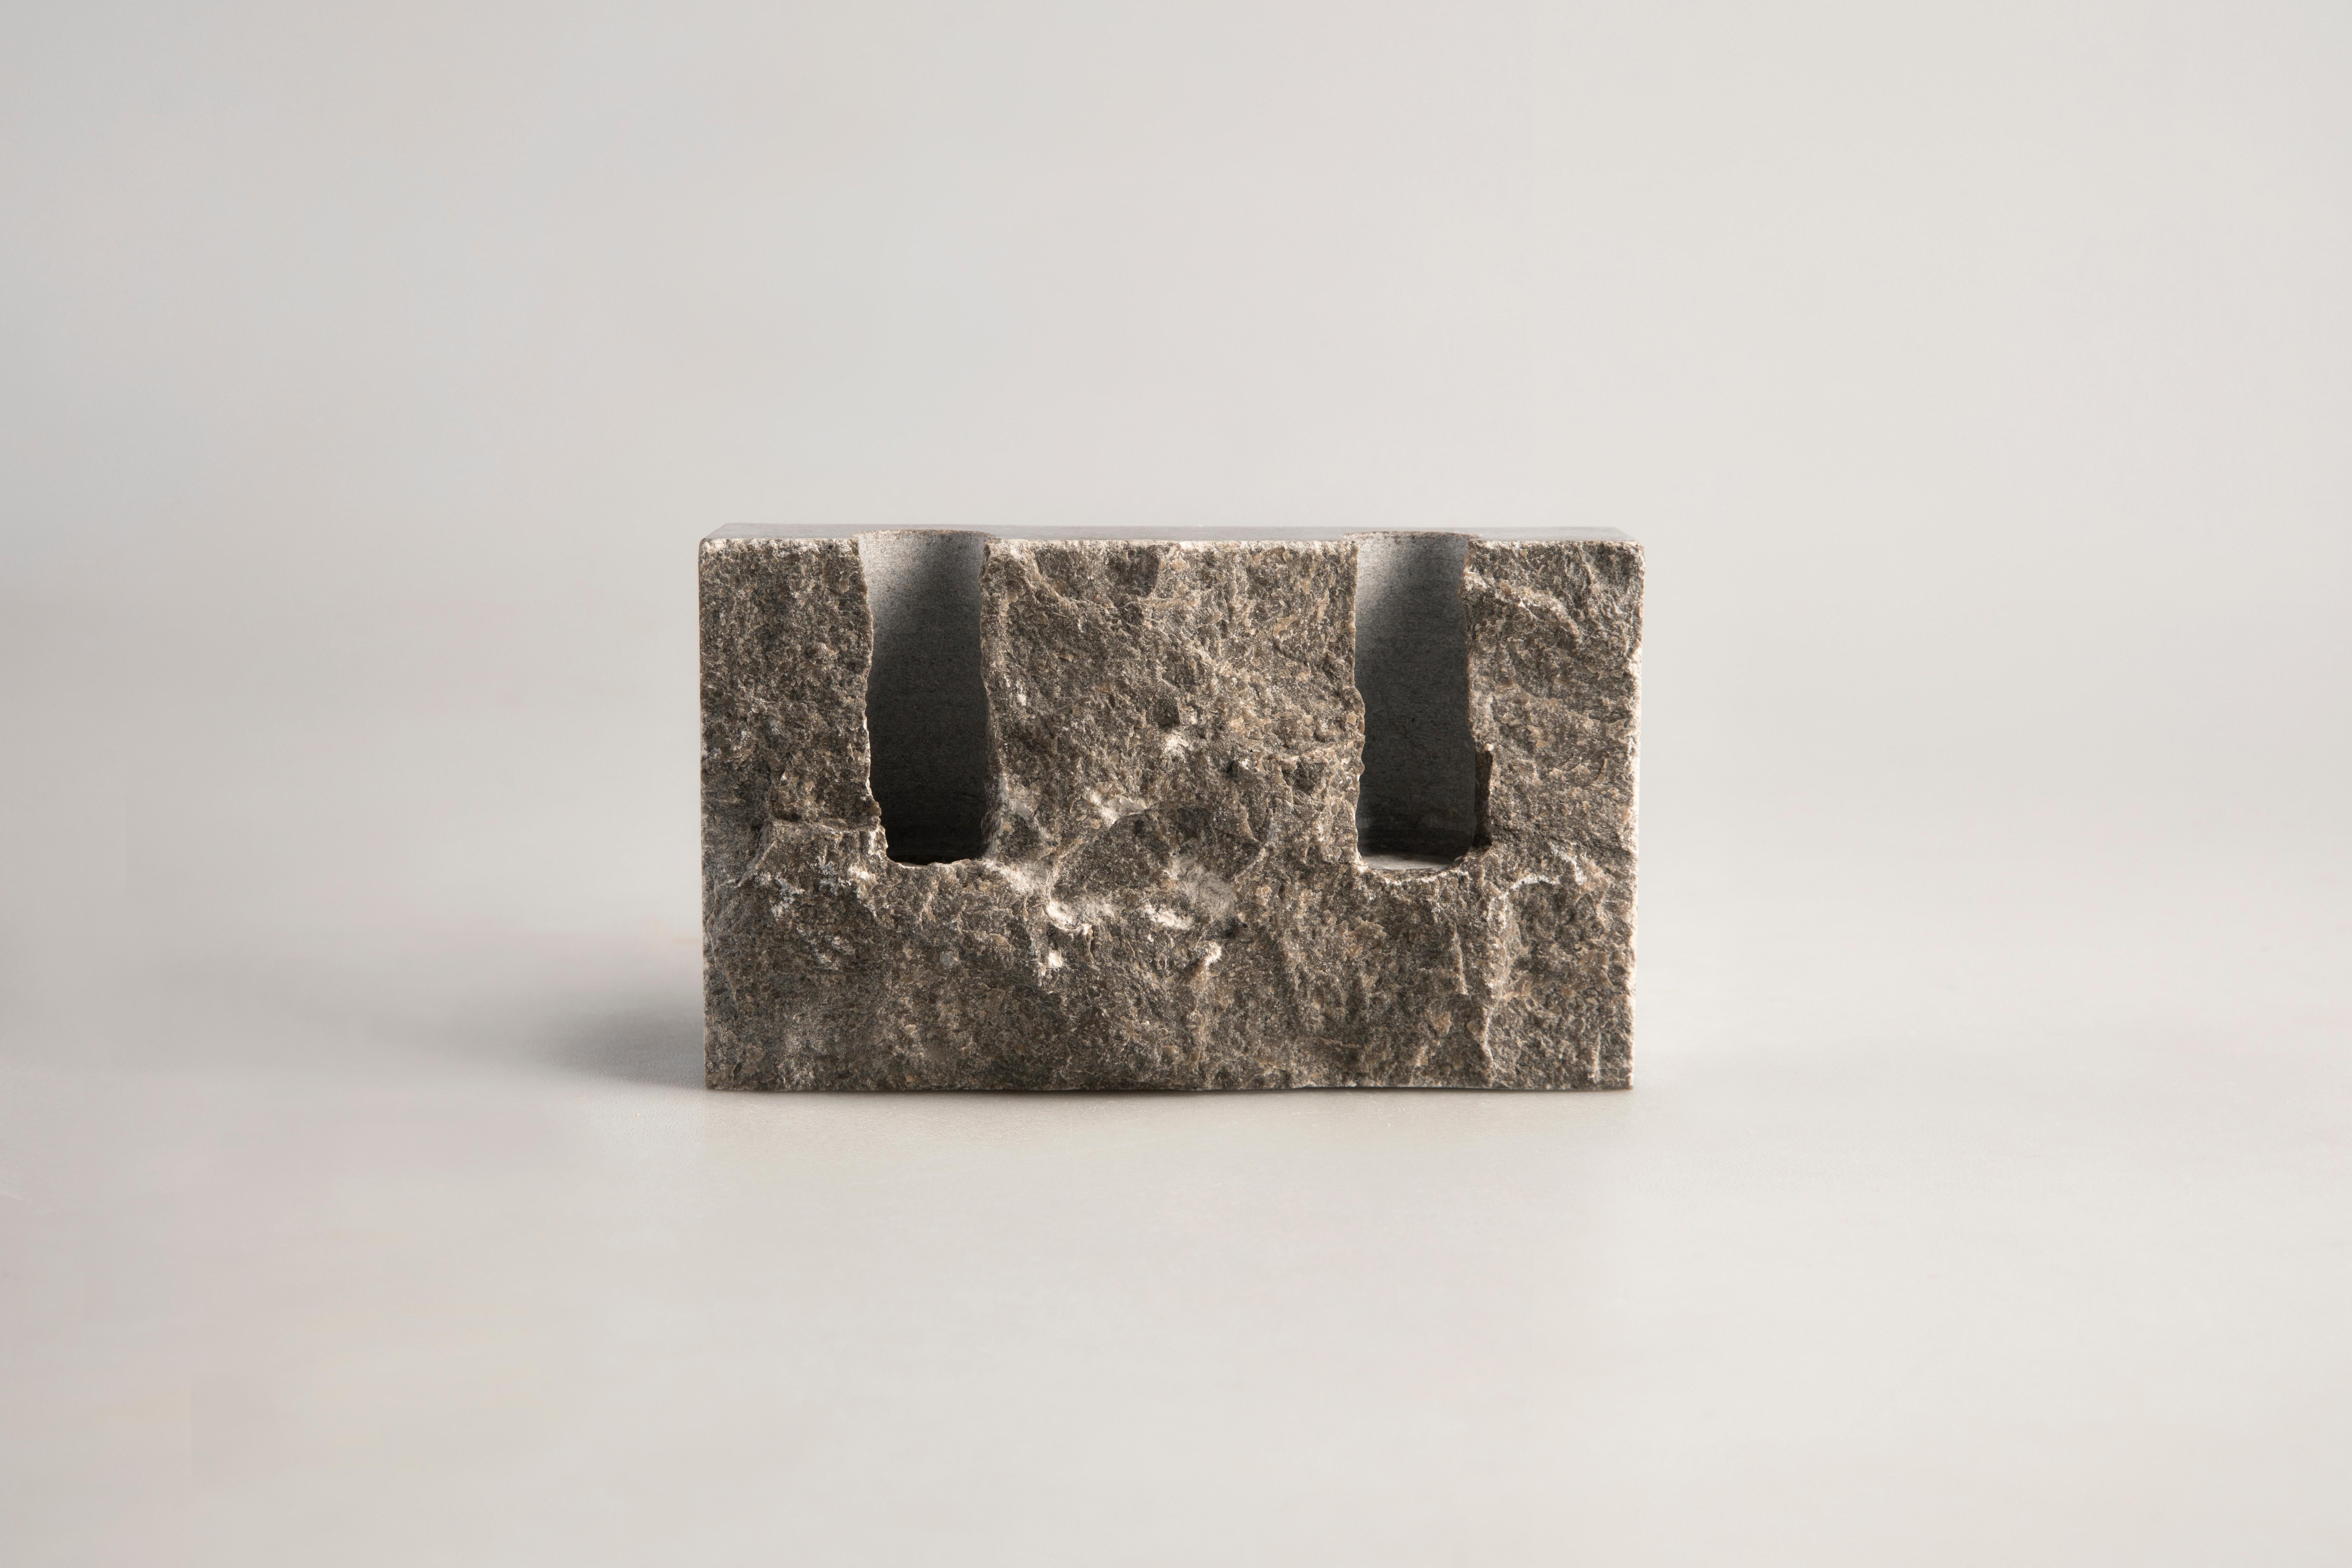 Grey Sant Vicenç sculpted candleholder by Sanna Völker
The size of the candleholder is 15 x 3 x 9 cm, designed to be used with drip-less candles of size Ø22 mm. 

All pieces are handcrafted in natural stone. This results in variations in color